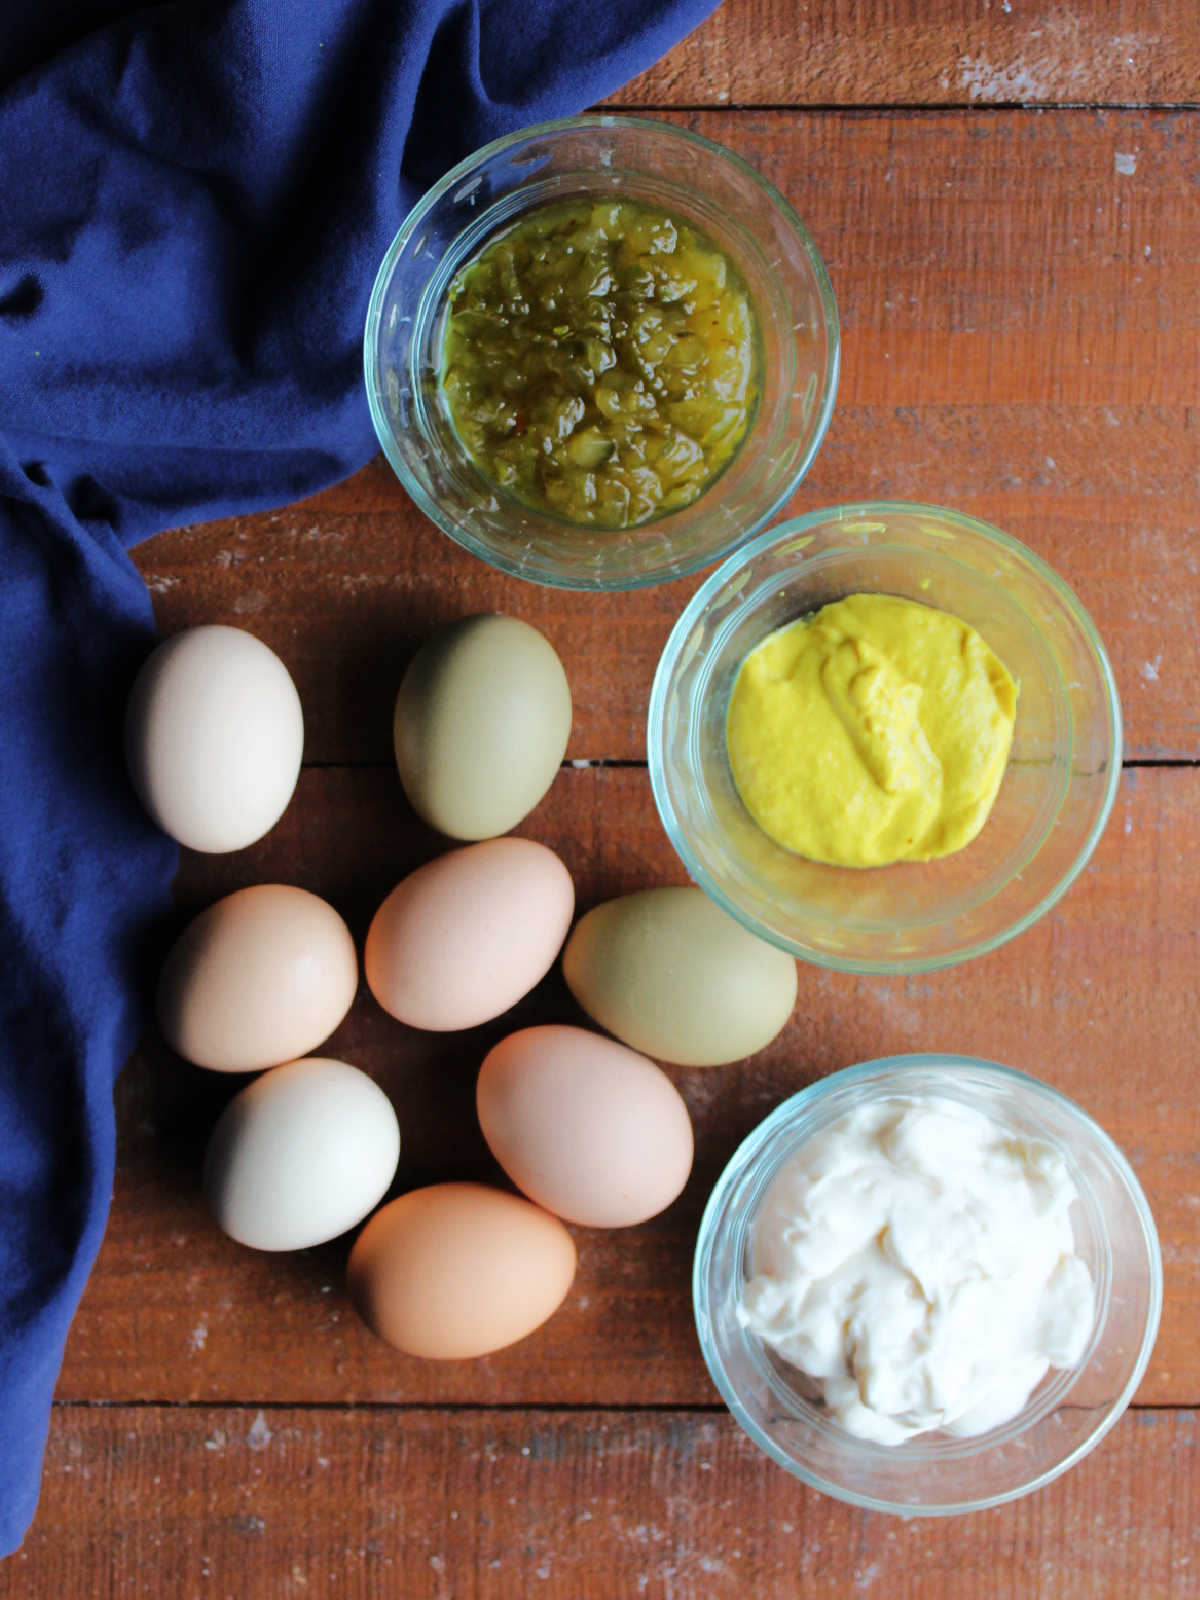 Ingredients including hard boiled eggs, pickle relish, yellow mustard, and mayonnaise, ready to be made into egg salad.